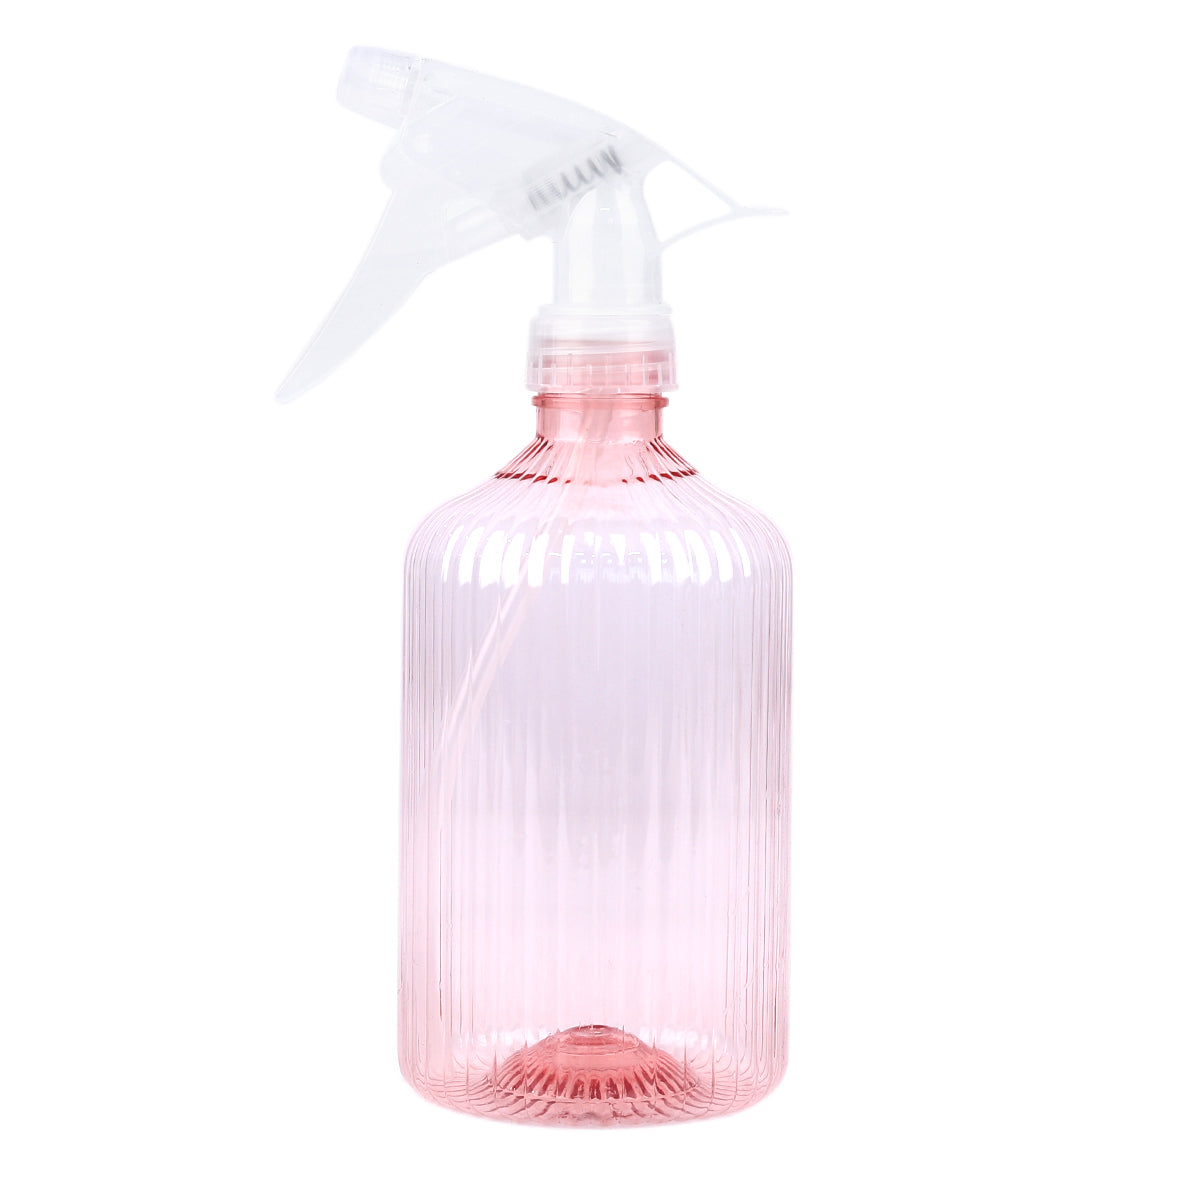 Plant mister for sale, spray bottle for sale, watering bottle for sale, plastic spray bottle, gardening tools for succulents and houseplants, handy plant spray bottle, mister bottle for air-plants